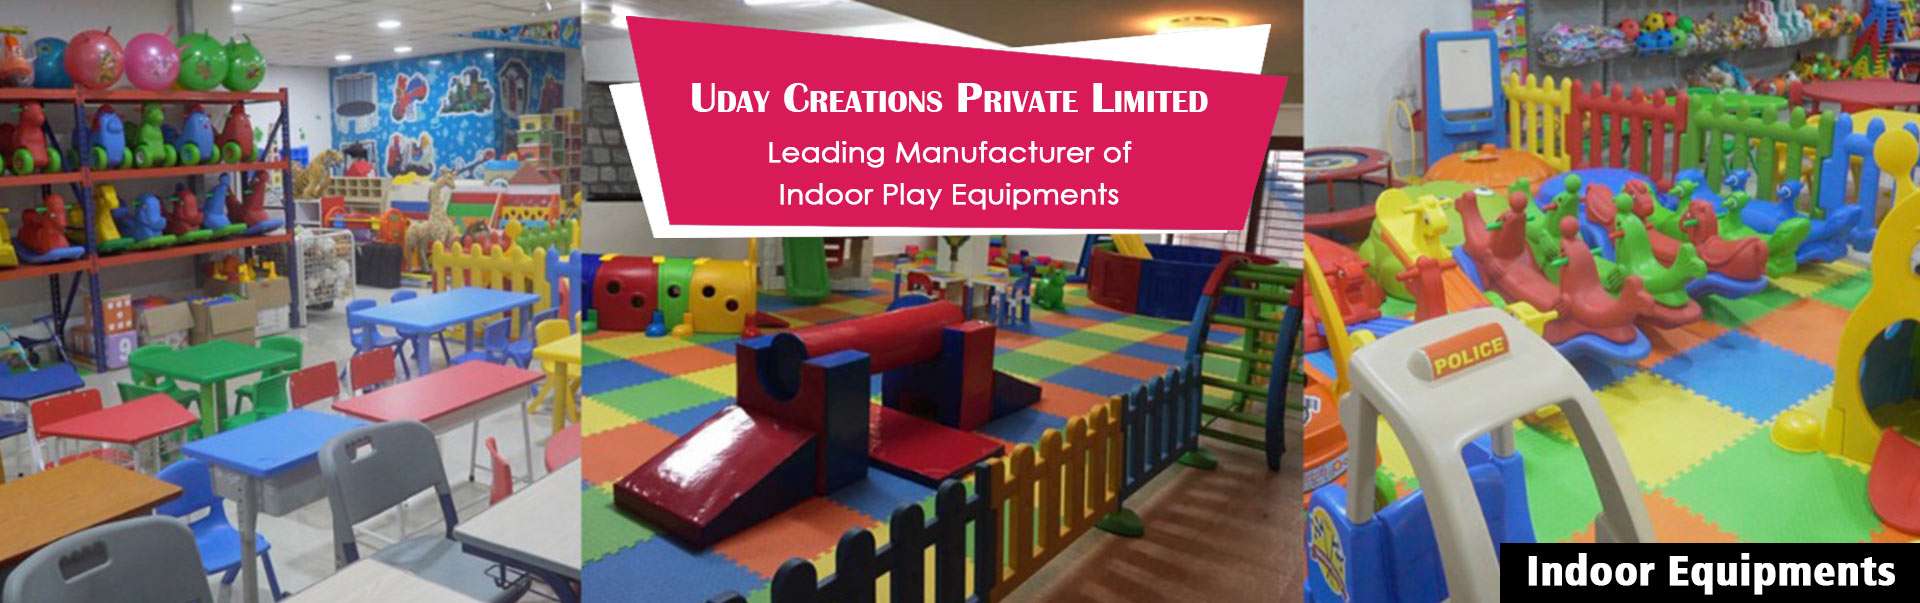  Uday Creations Pvt Ltd in Surguja